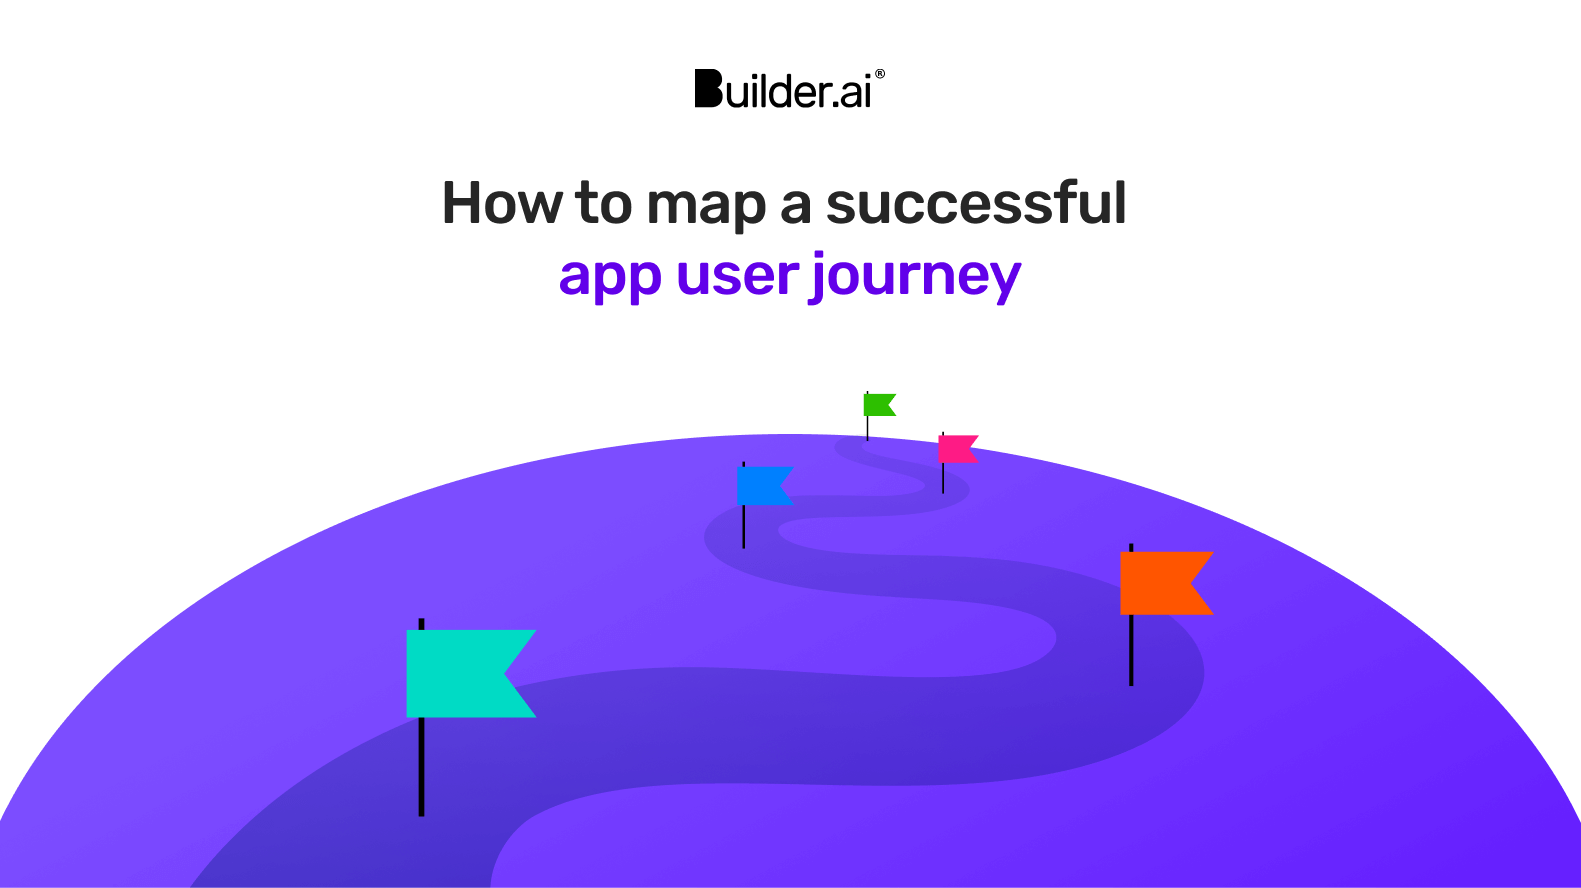 5 simple steps to mapping app user journeys